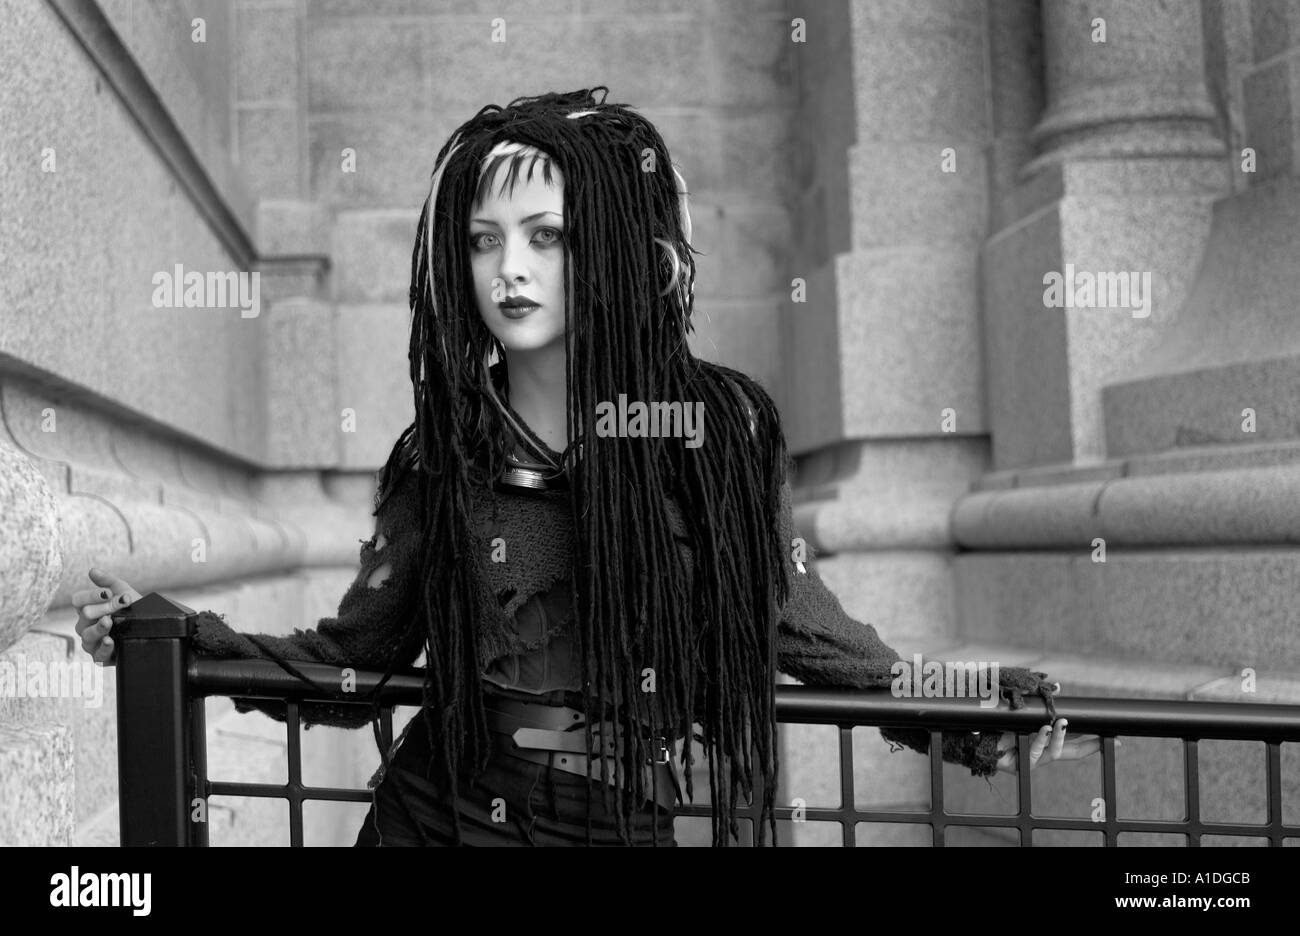 Goth girl in black standing at railing Stock Photo